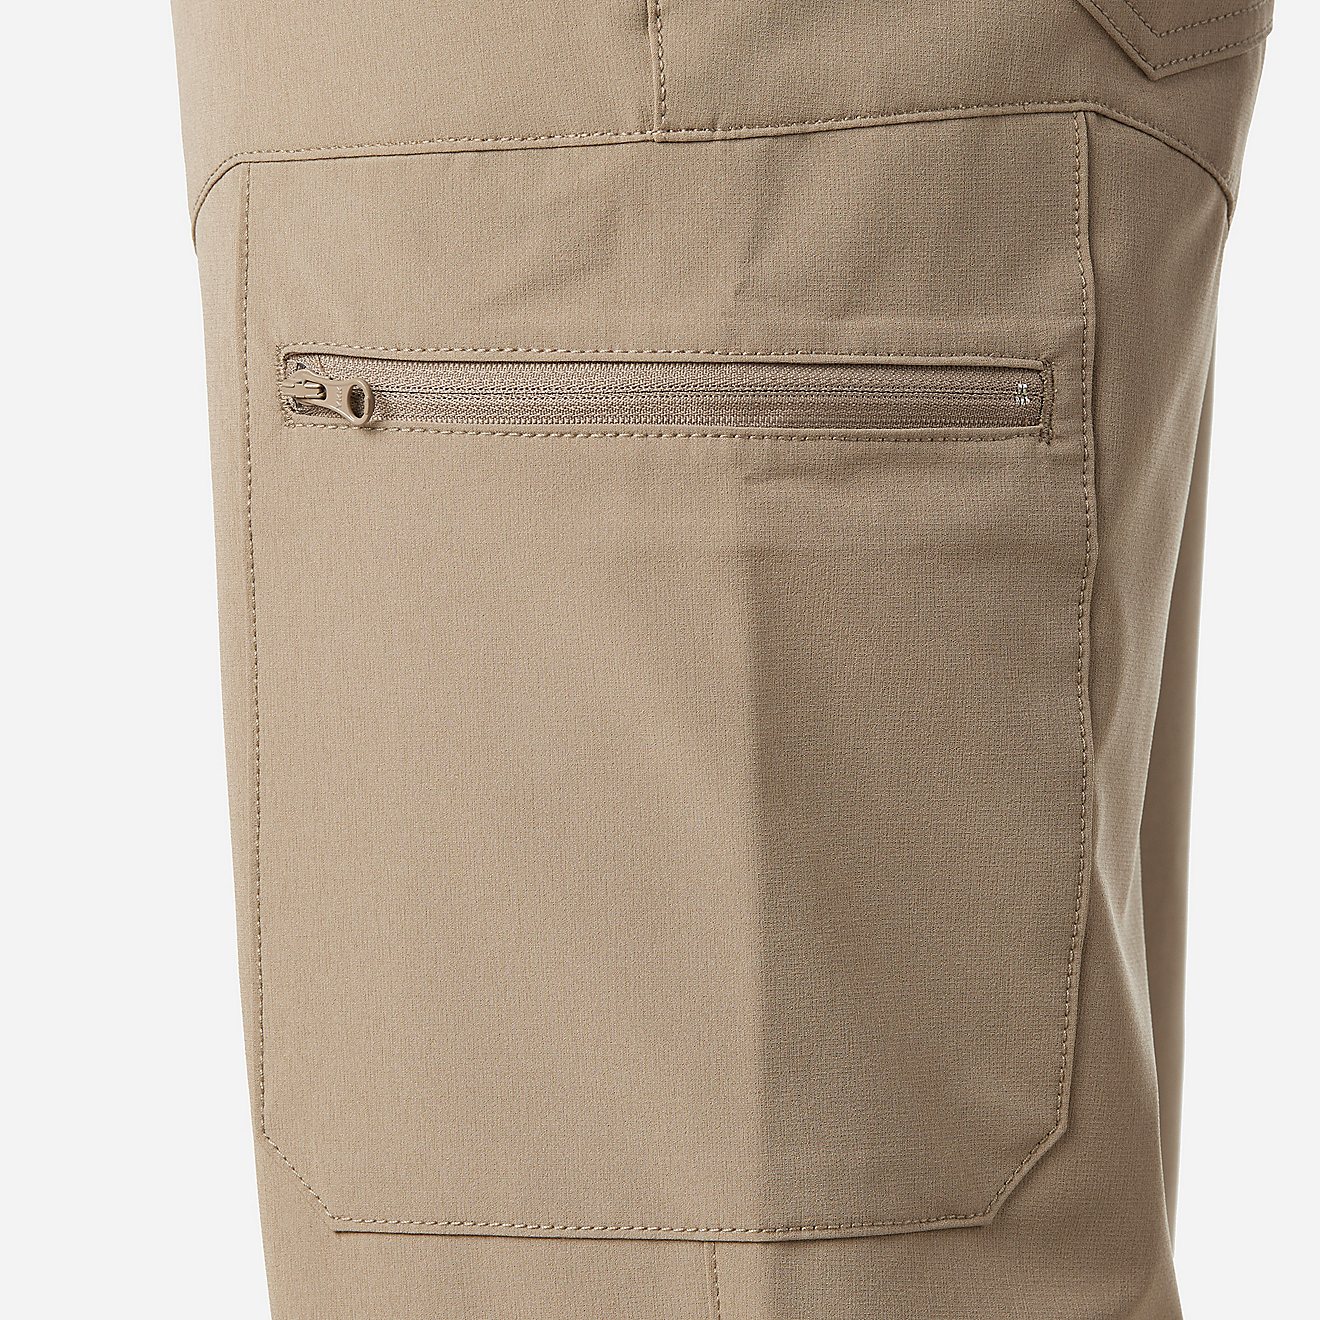 Magellan Outdoors Men's Hickory Canyon Stretch Woven Cargo Pants                                                                 - view number 3